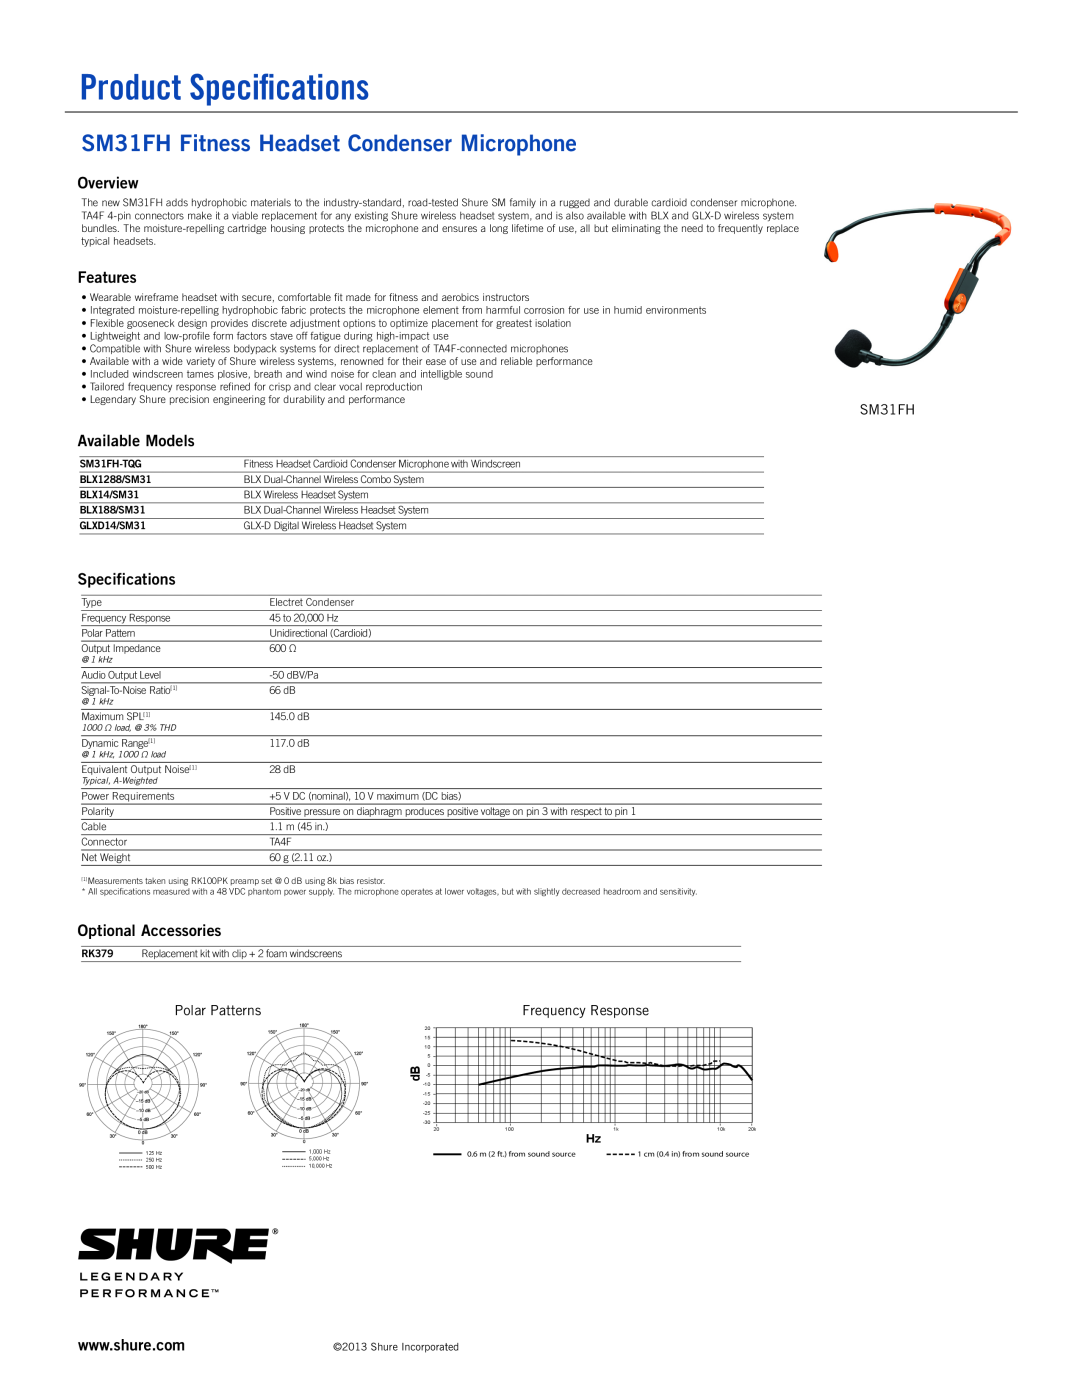 Shure specifications Product Specifications, SM31FH Fitness Headset Condenser Microphone, Overview, Features 